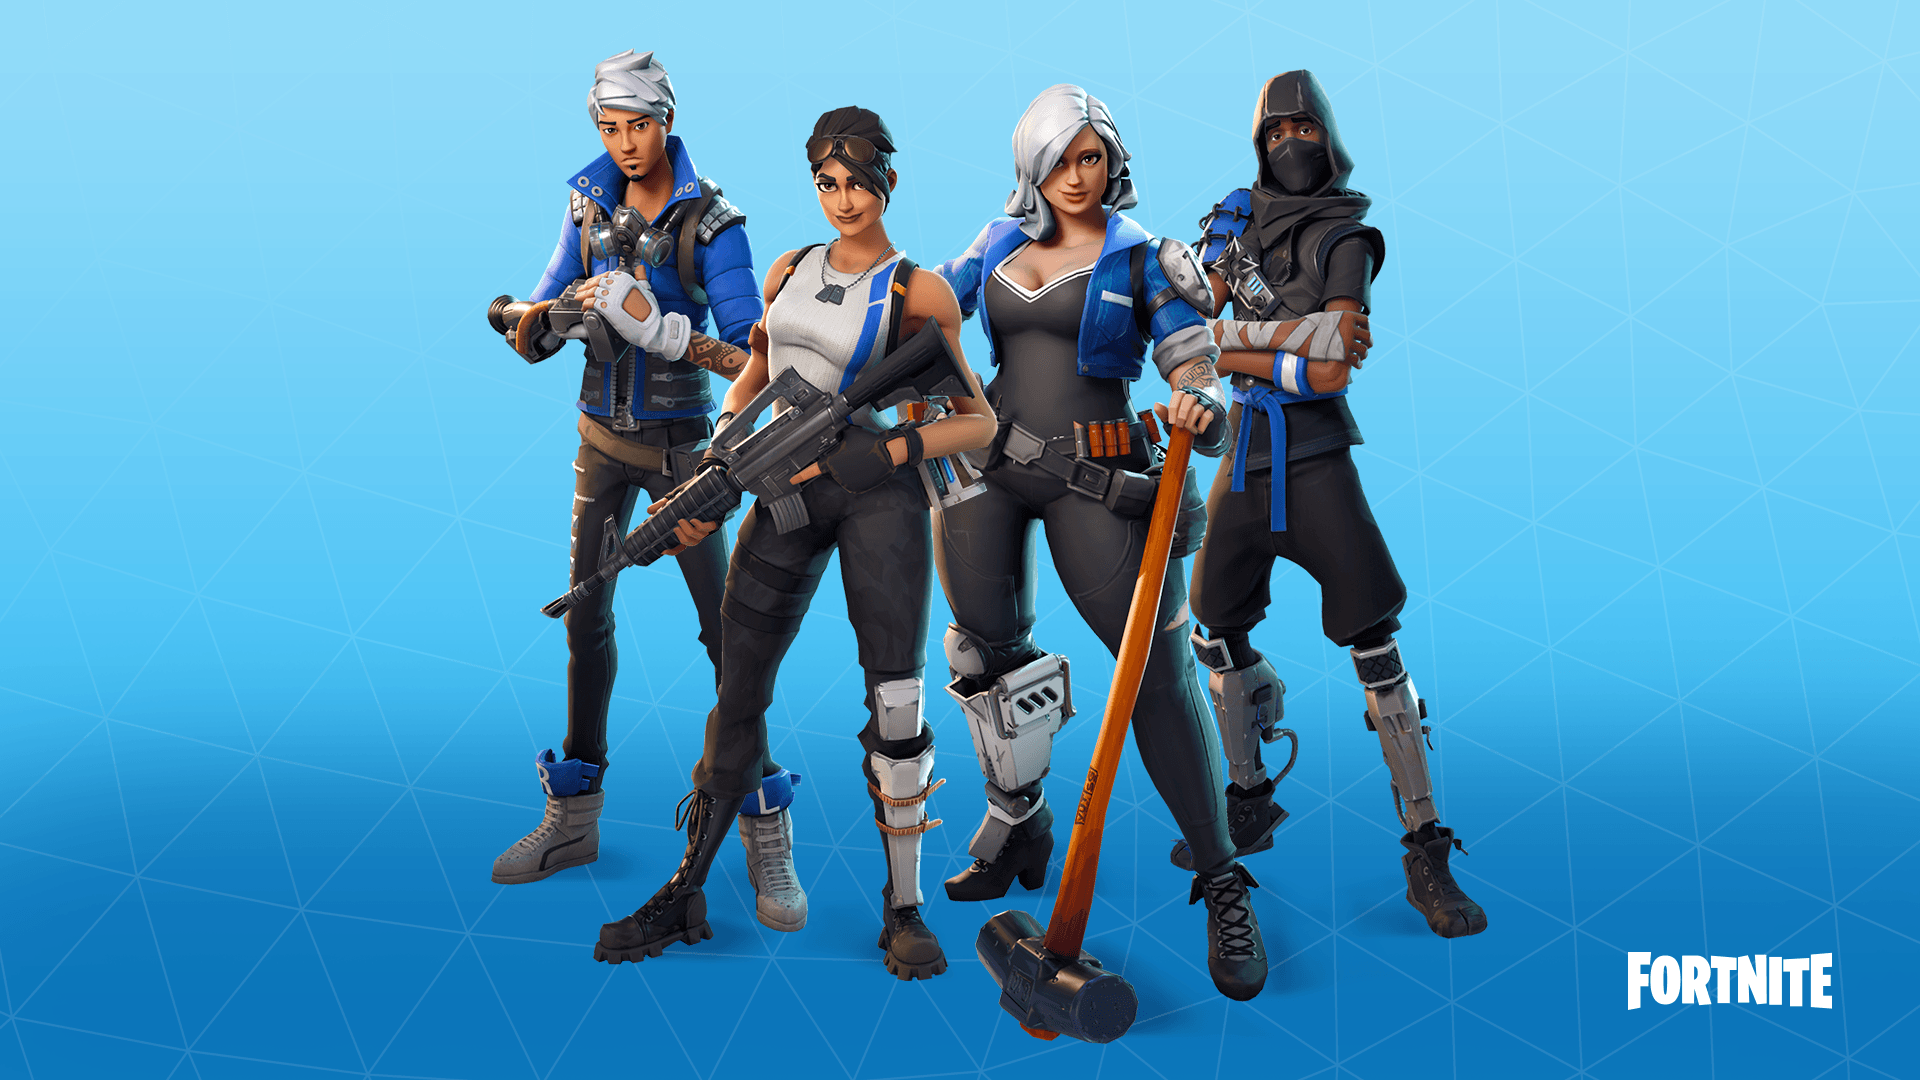 Fortnite Coming July 25 With PlayStation Exclusive Heroes